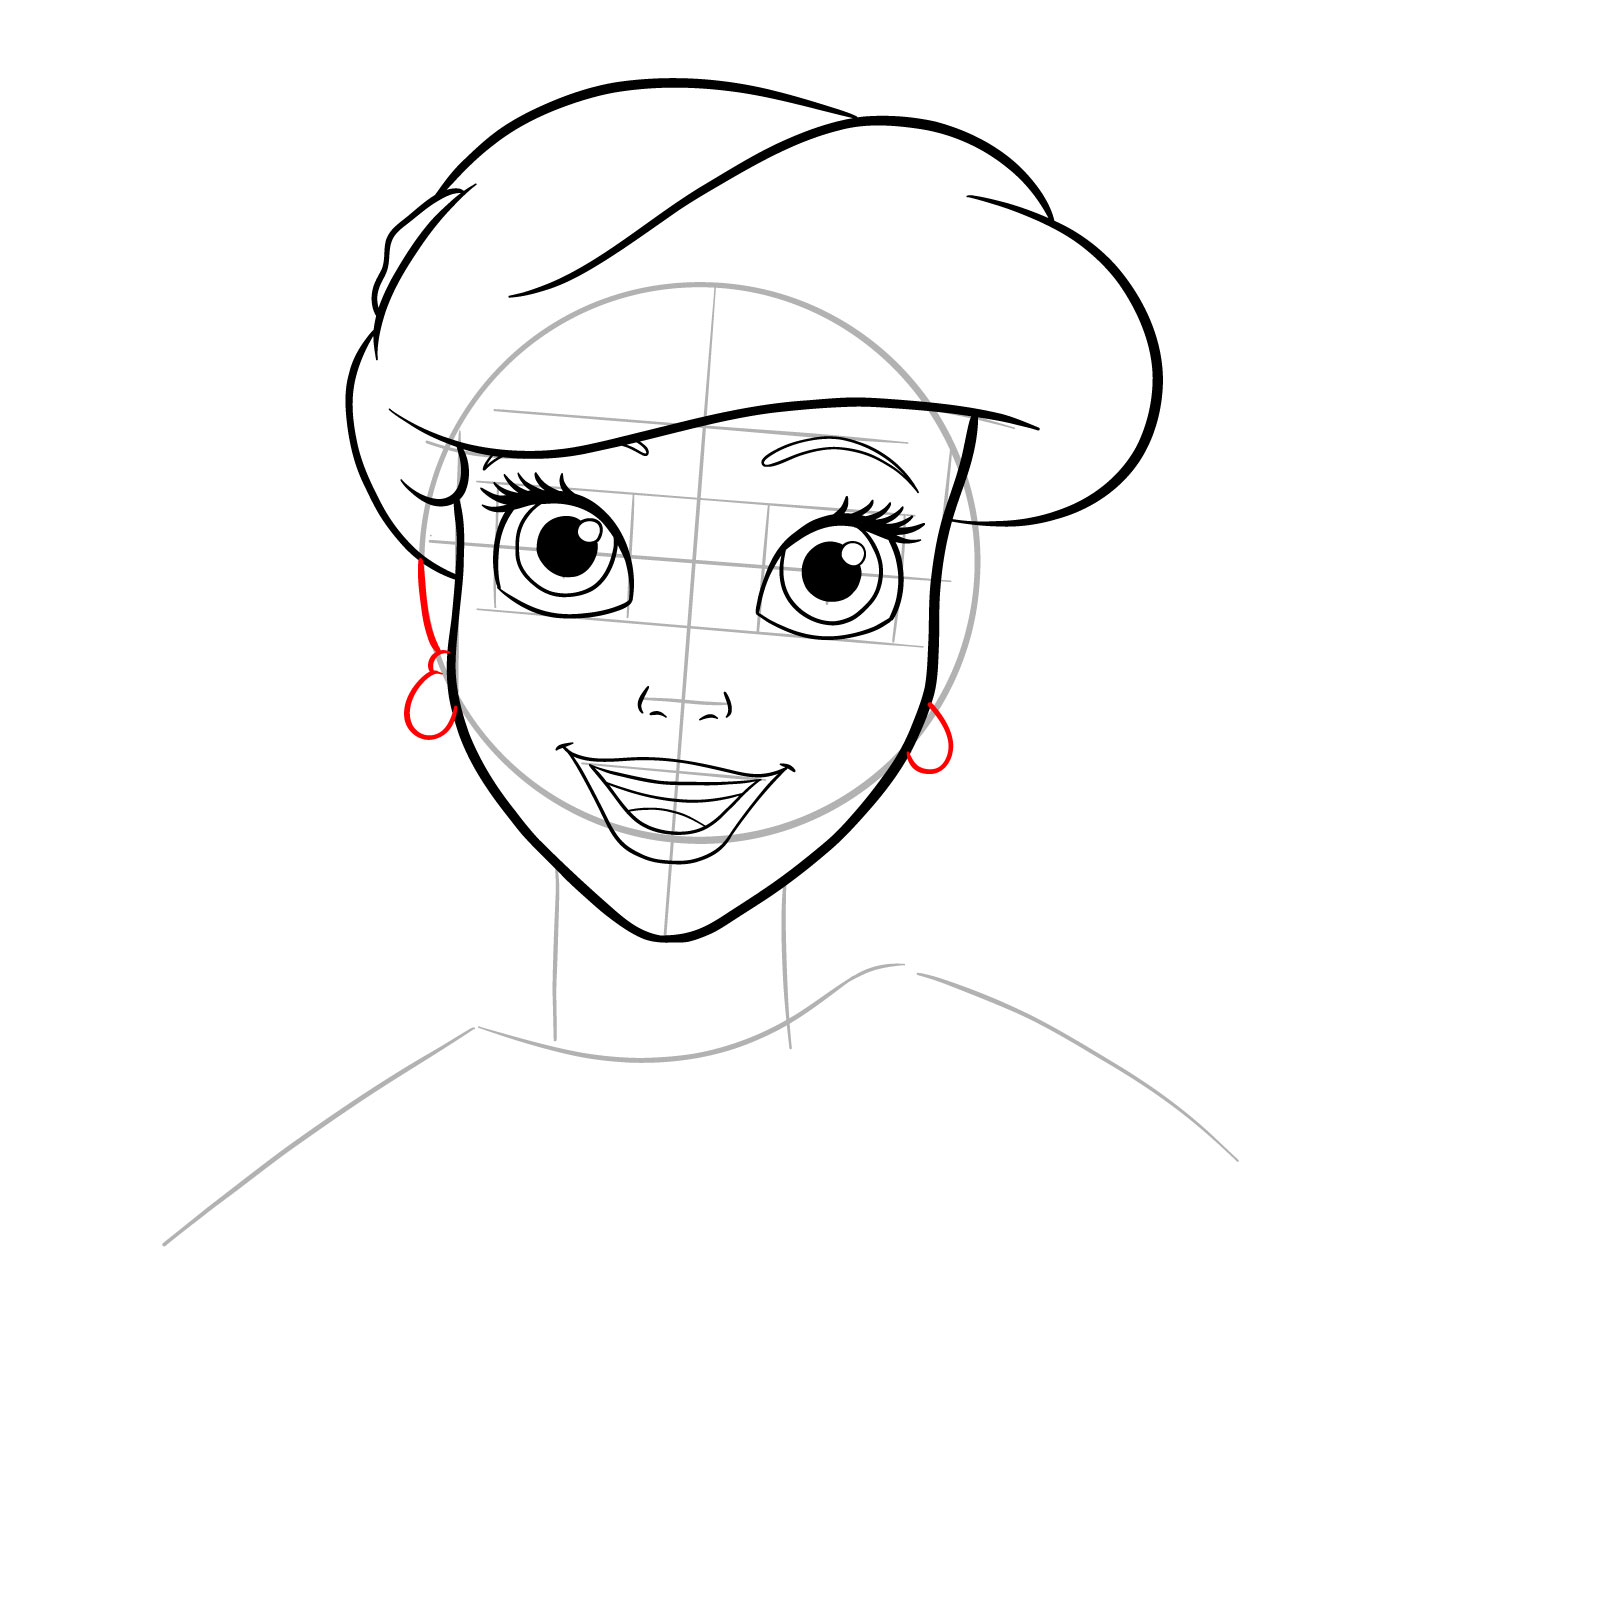 How to draw Ariel's face - The Little Mermaid - step 22